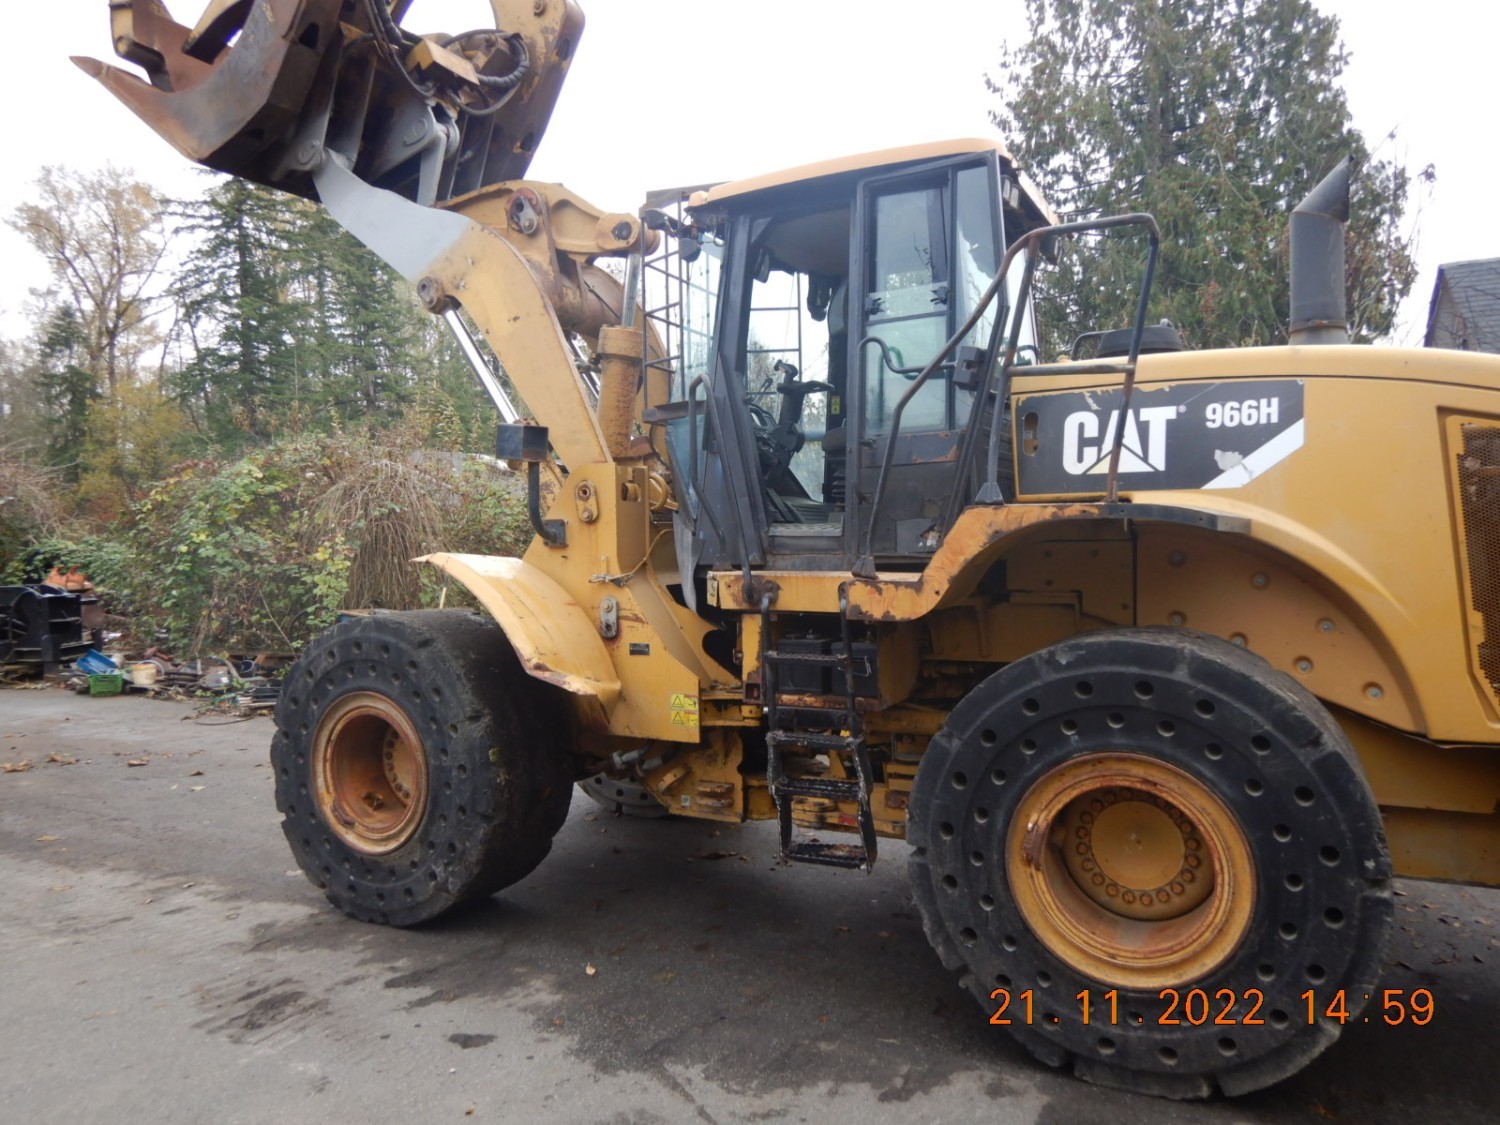 sold-2010-cat-966h-cw-custom-daequip-dual-log-or-pipe-grapple-with-internal-grapple-to-keep-pipe-logs-poles-secure-big-7